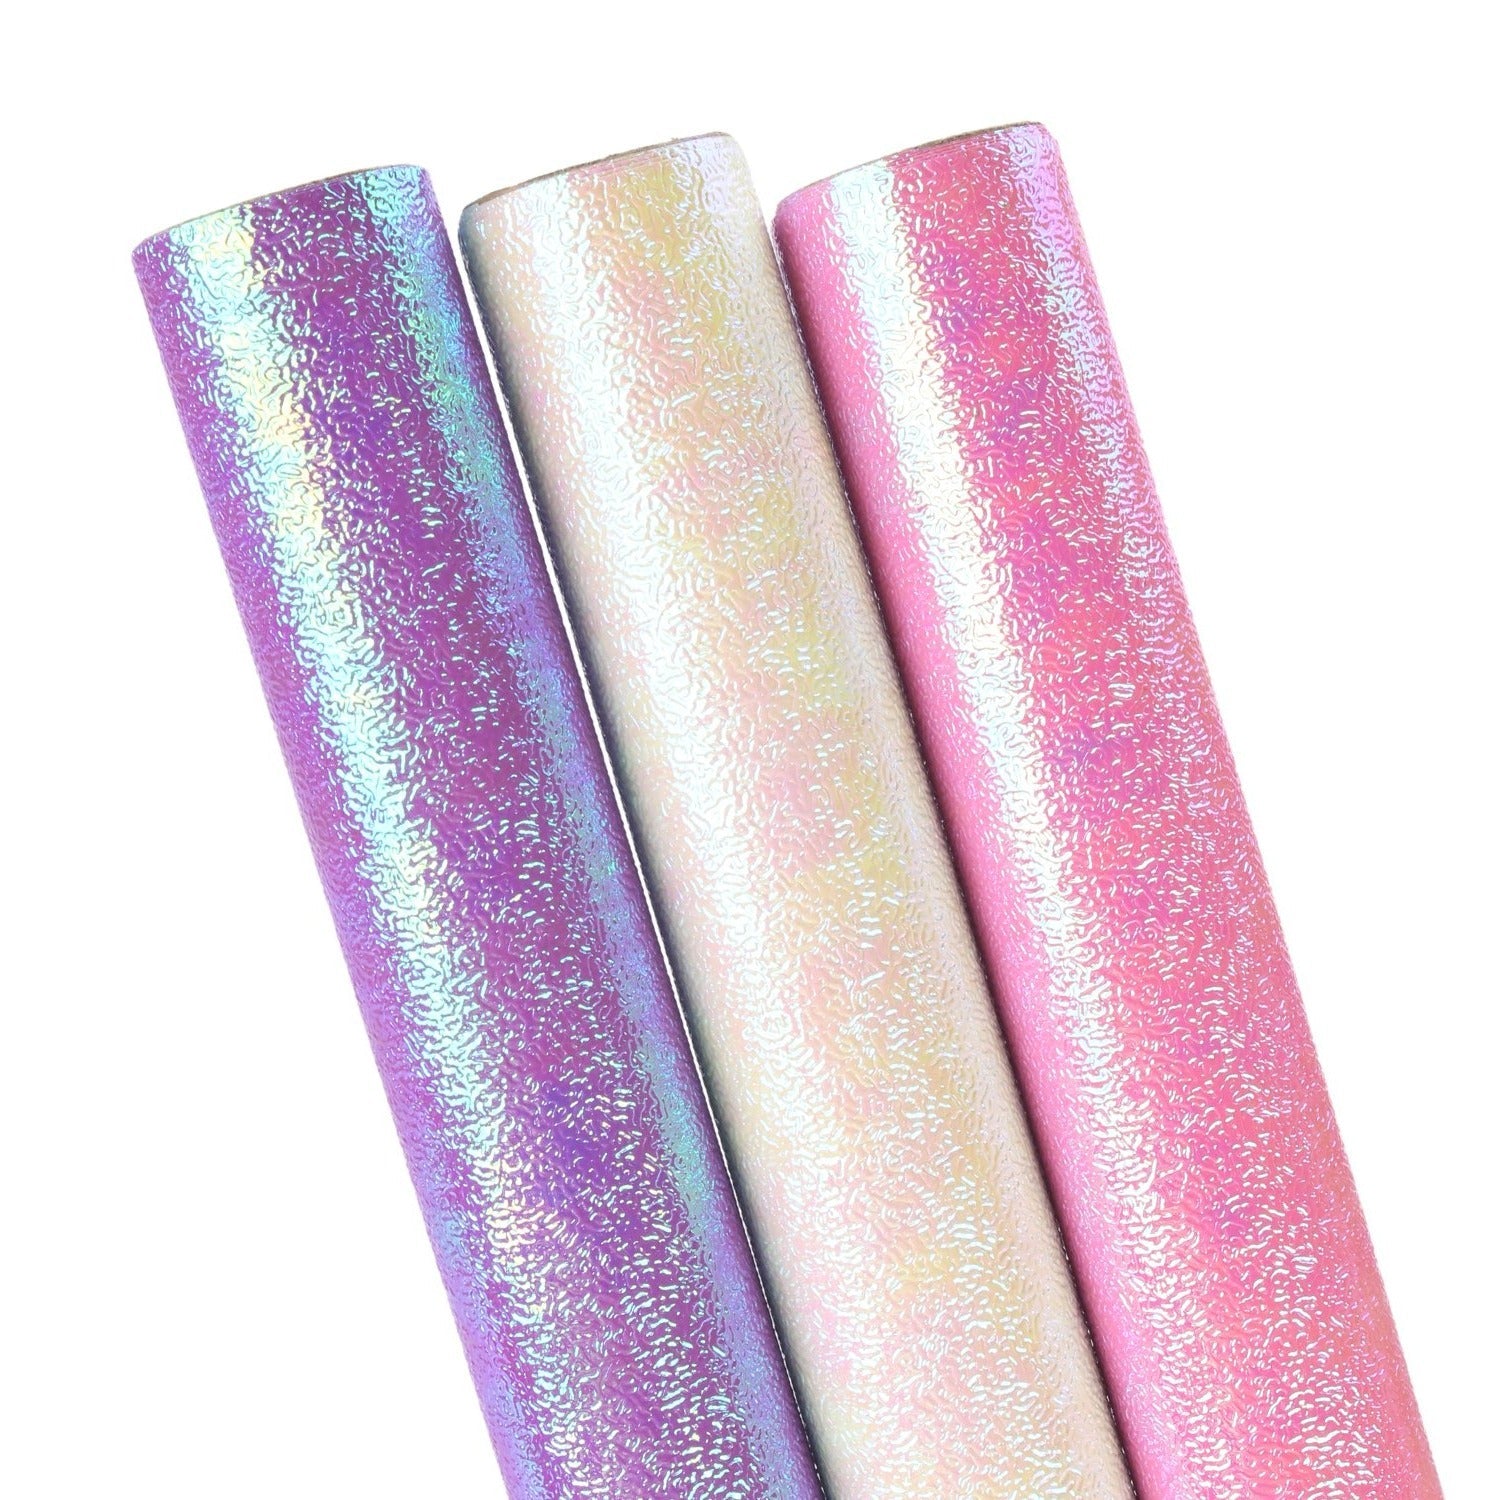 Textured Iridescent Wrapping Paper Bundle Pink/White/Purple  - 3 Roll Pack